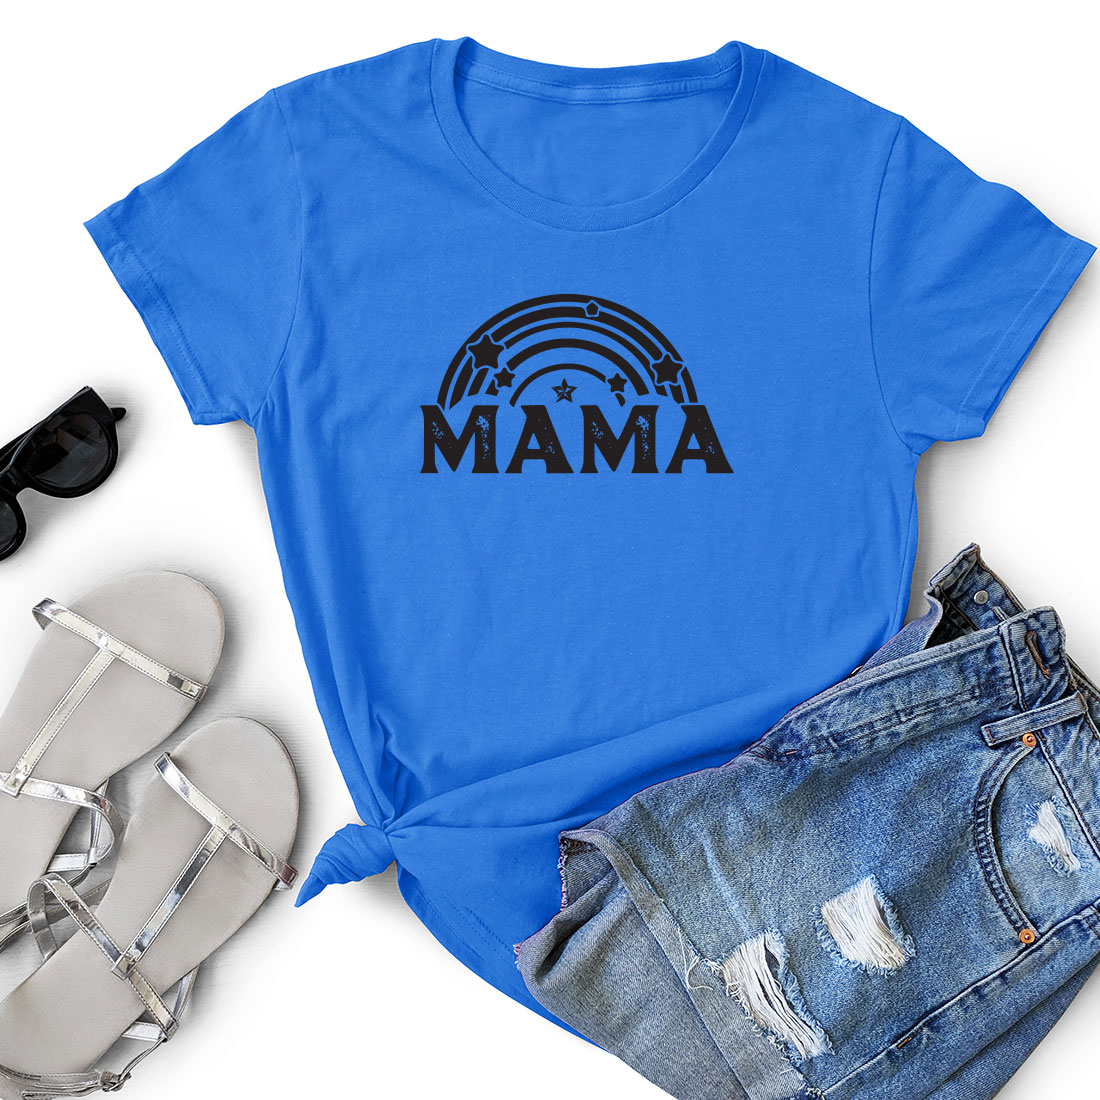 Blue shirt with the word mama on it.